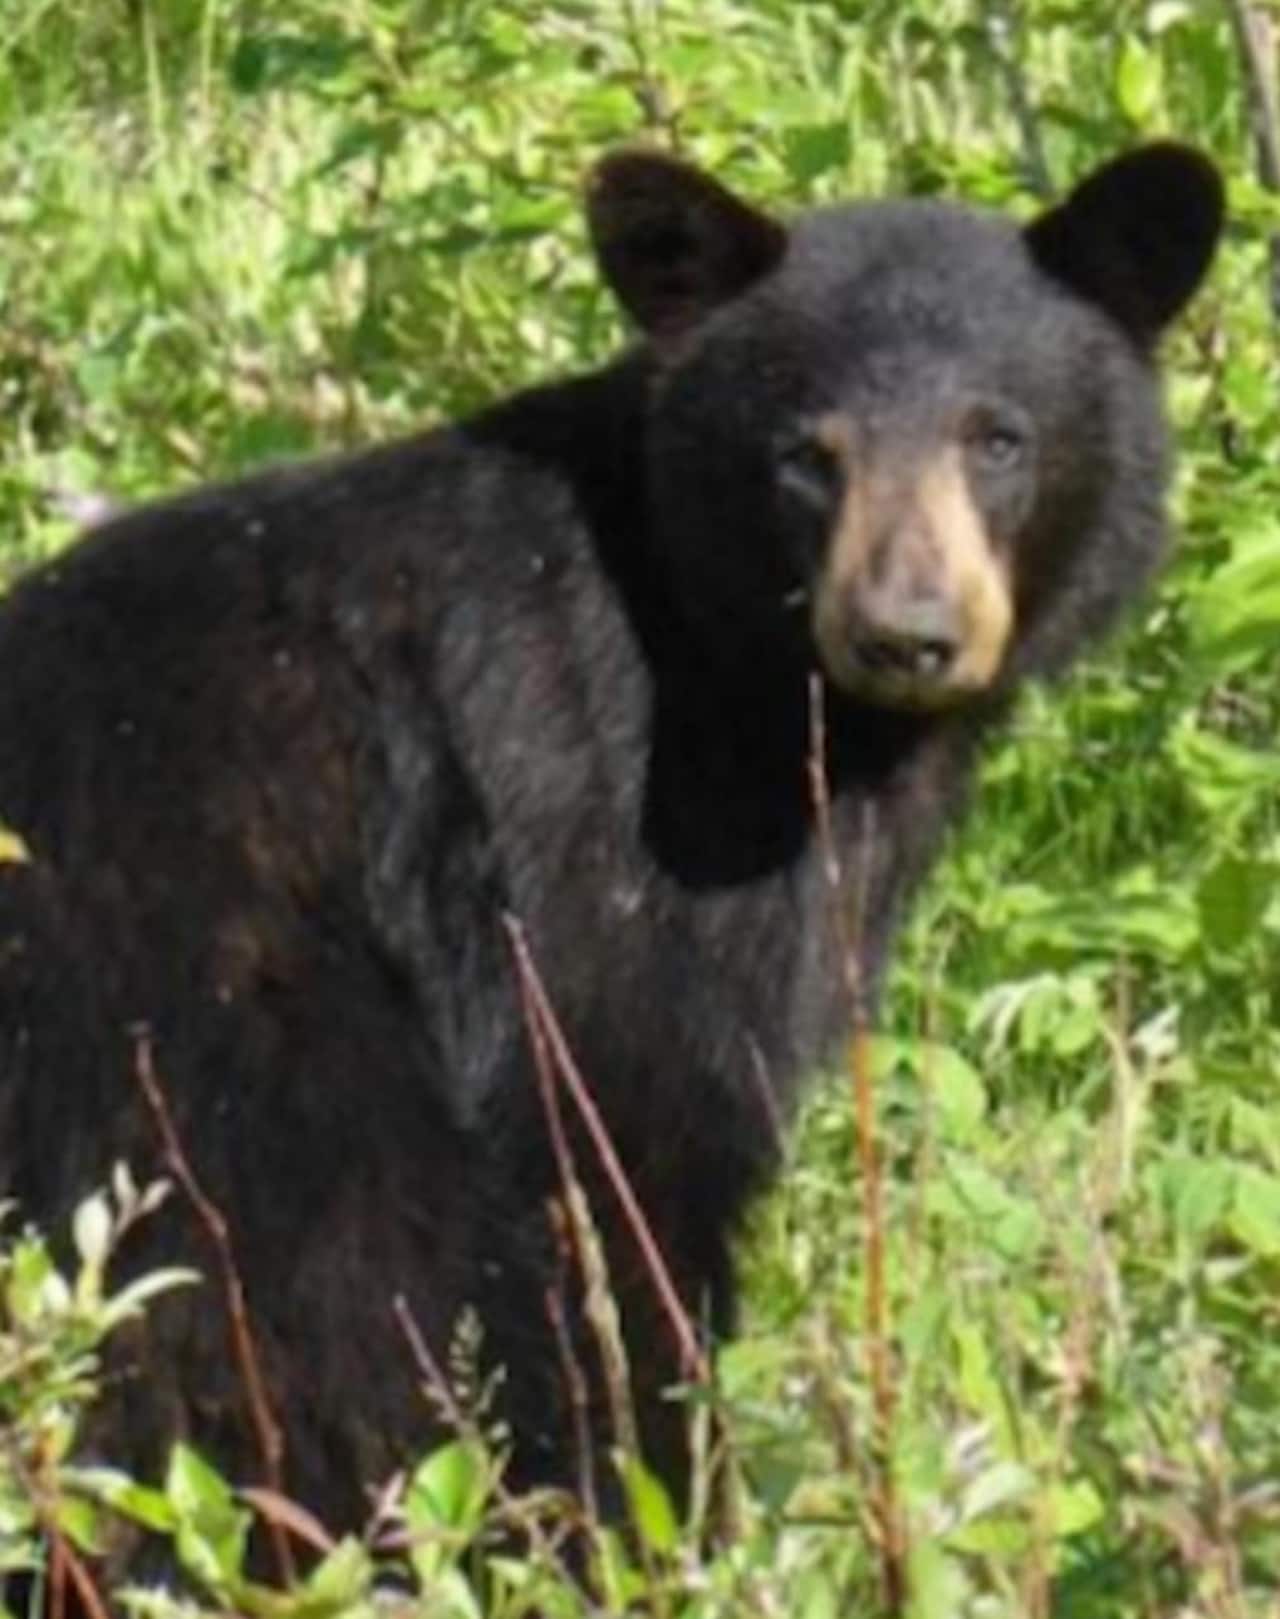 Bear sightings are on the rise in North Castle.